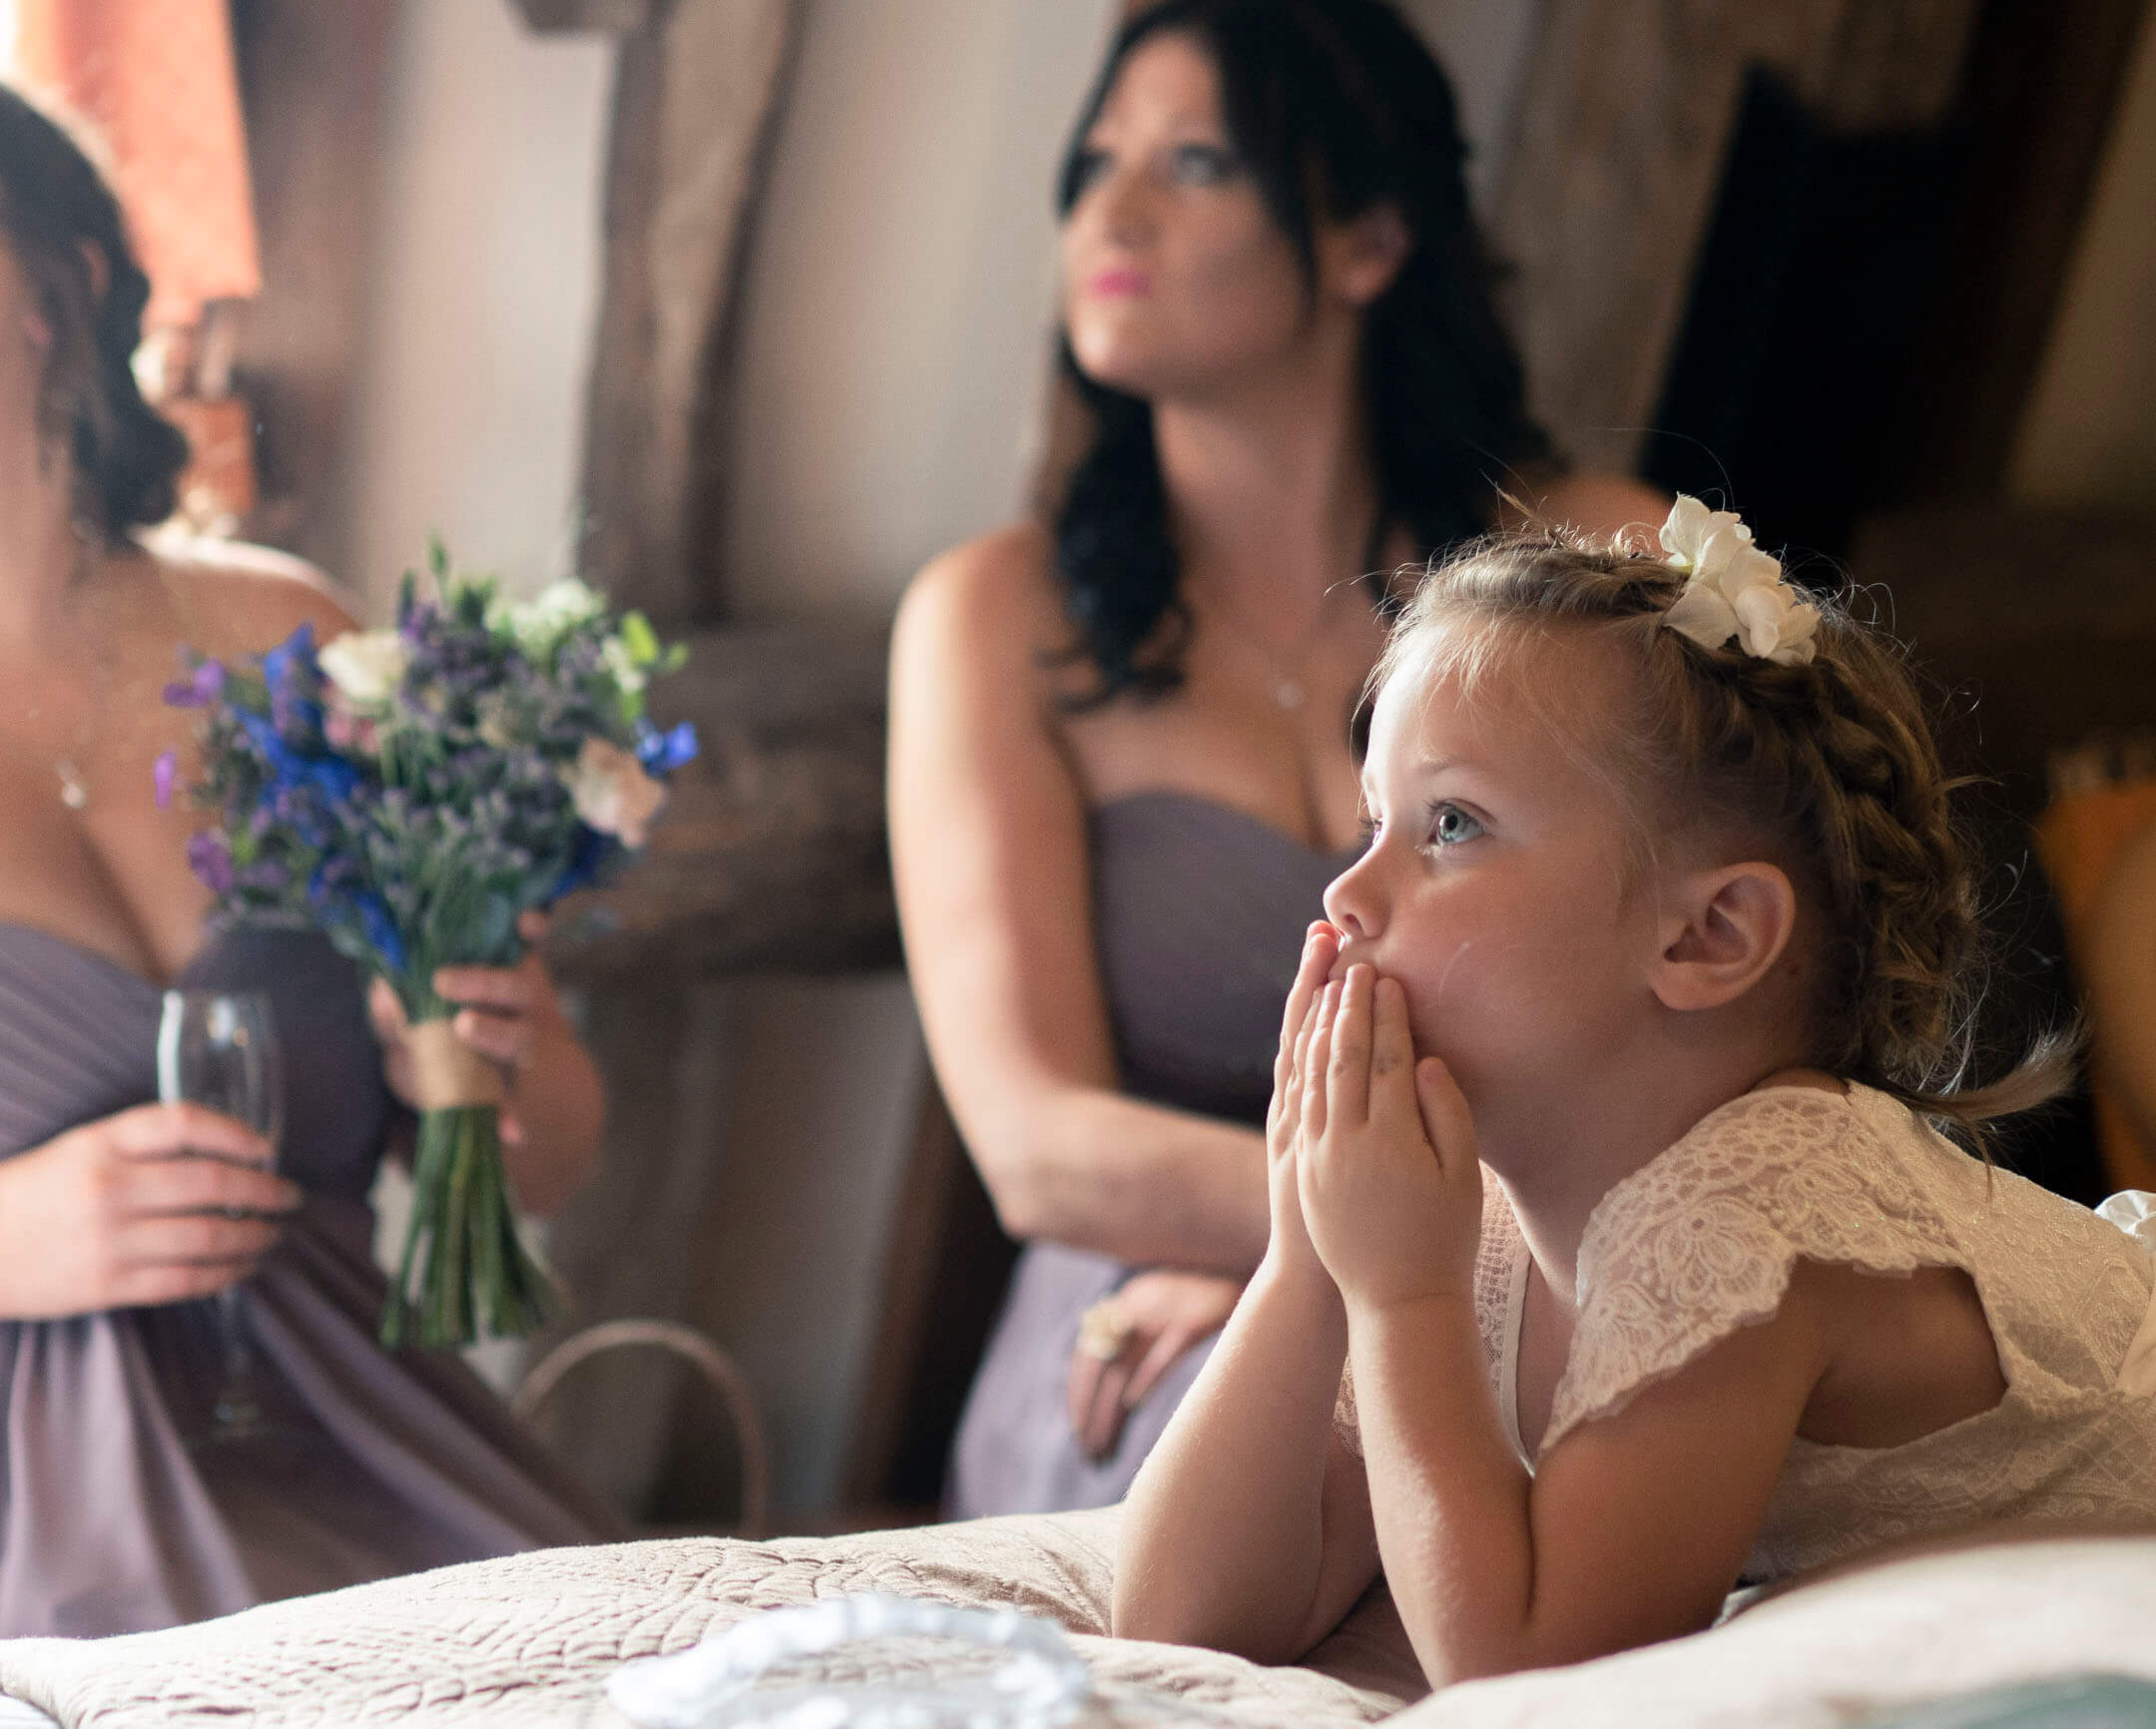 The bride's niece sits and watches her, spellbound.